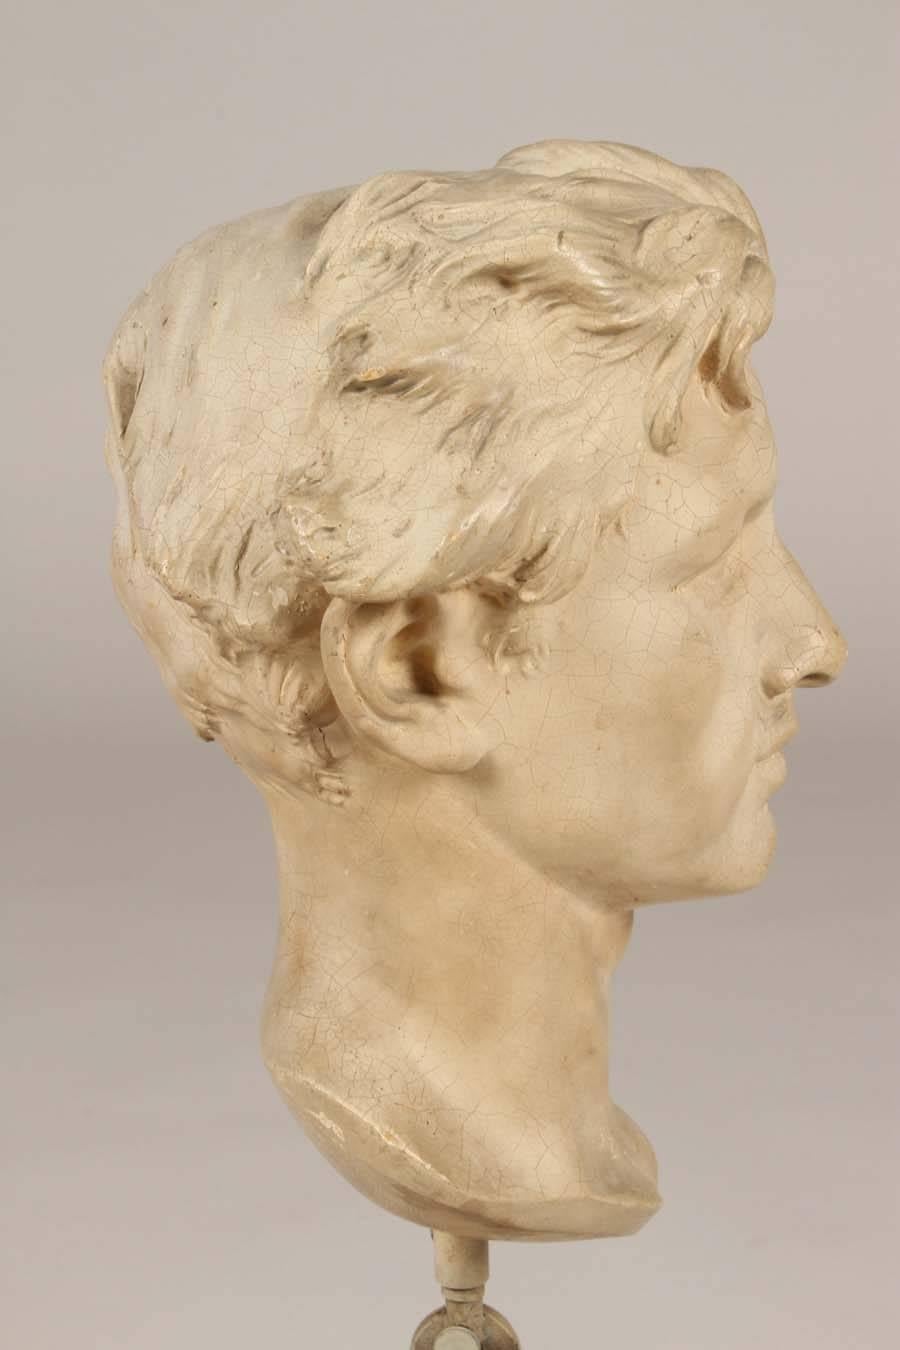 20th Century Plaster Bust of a Man on Stand